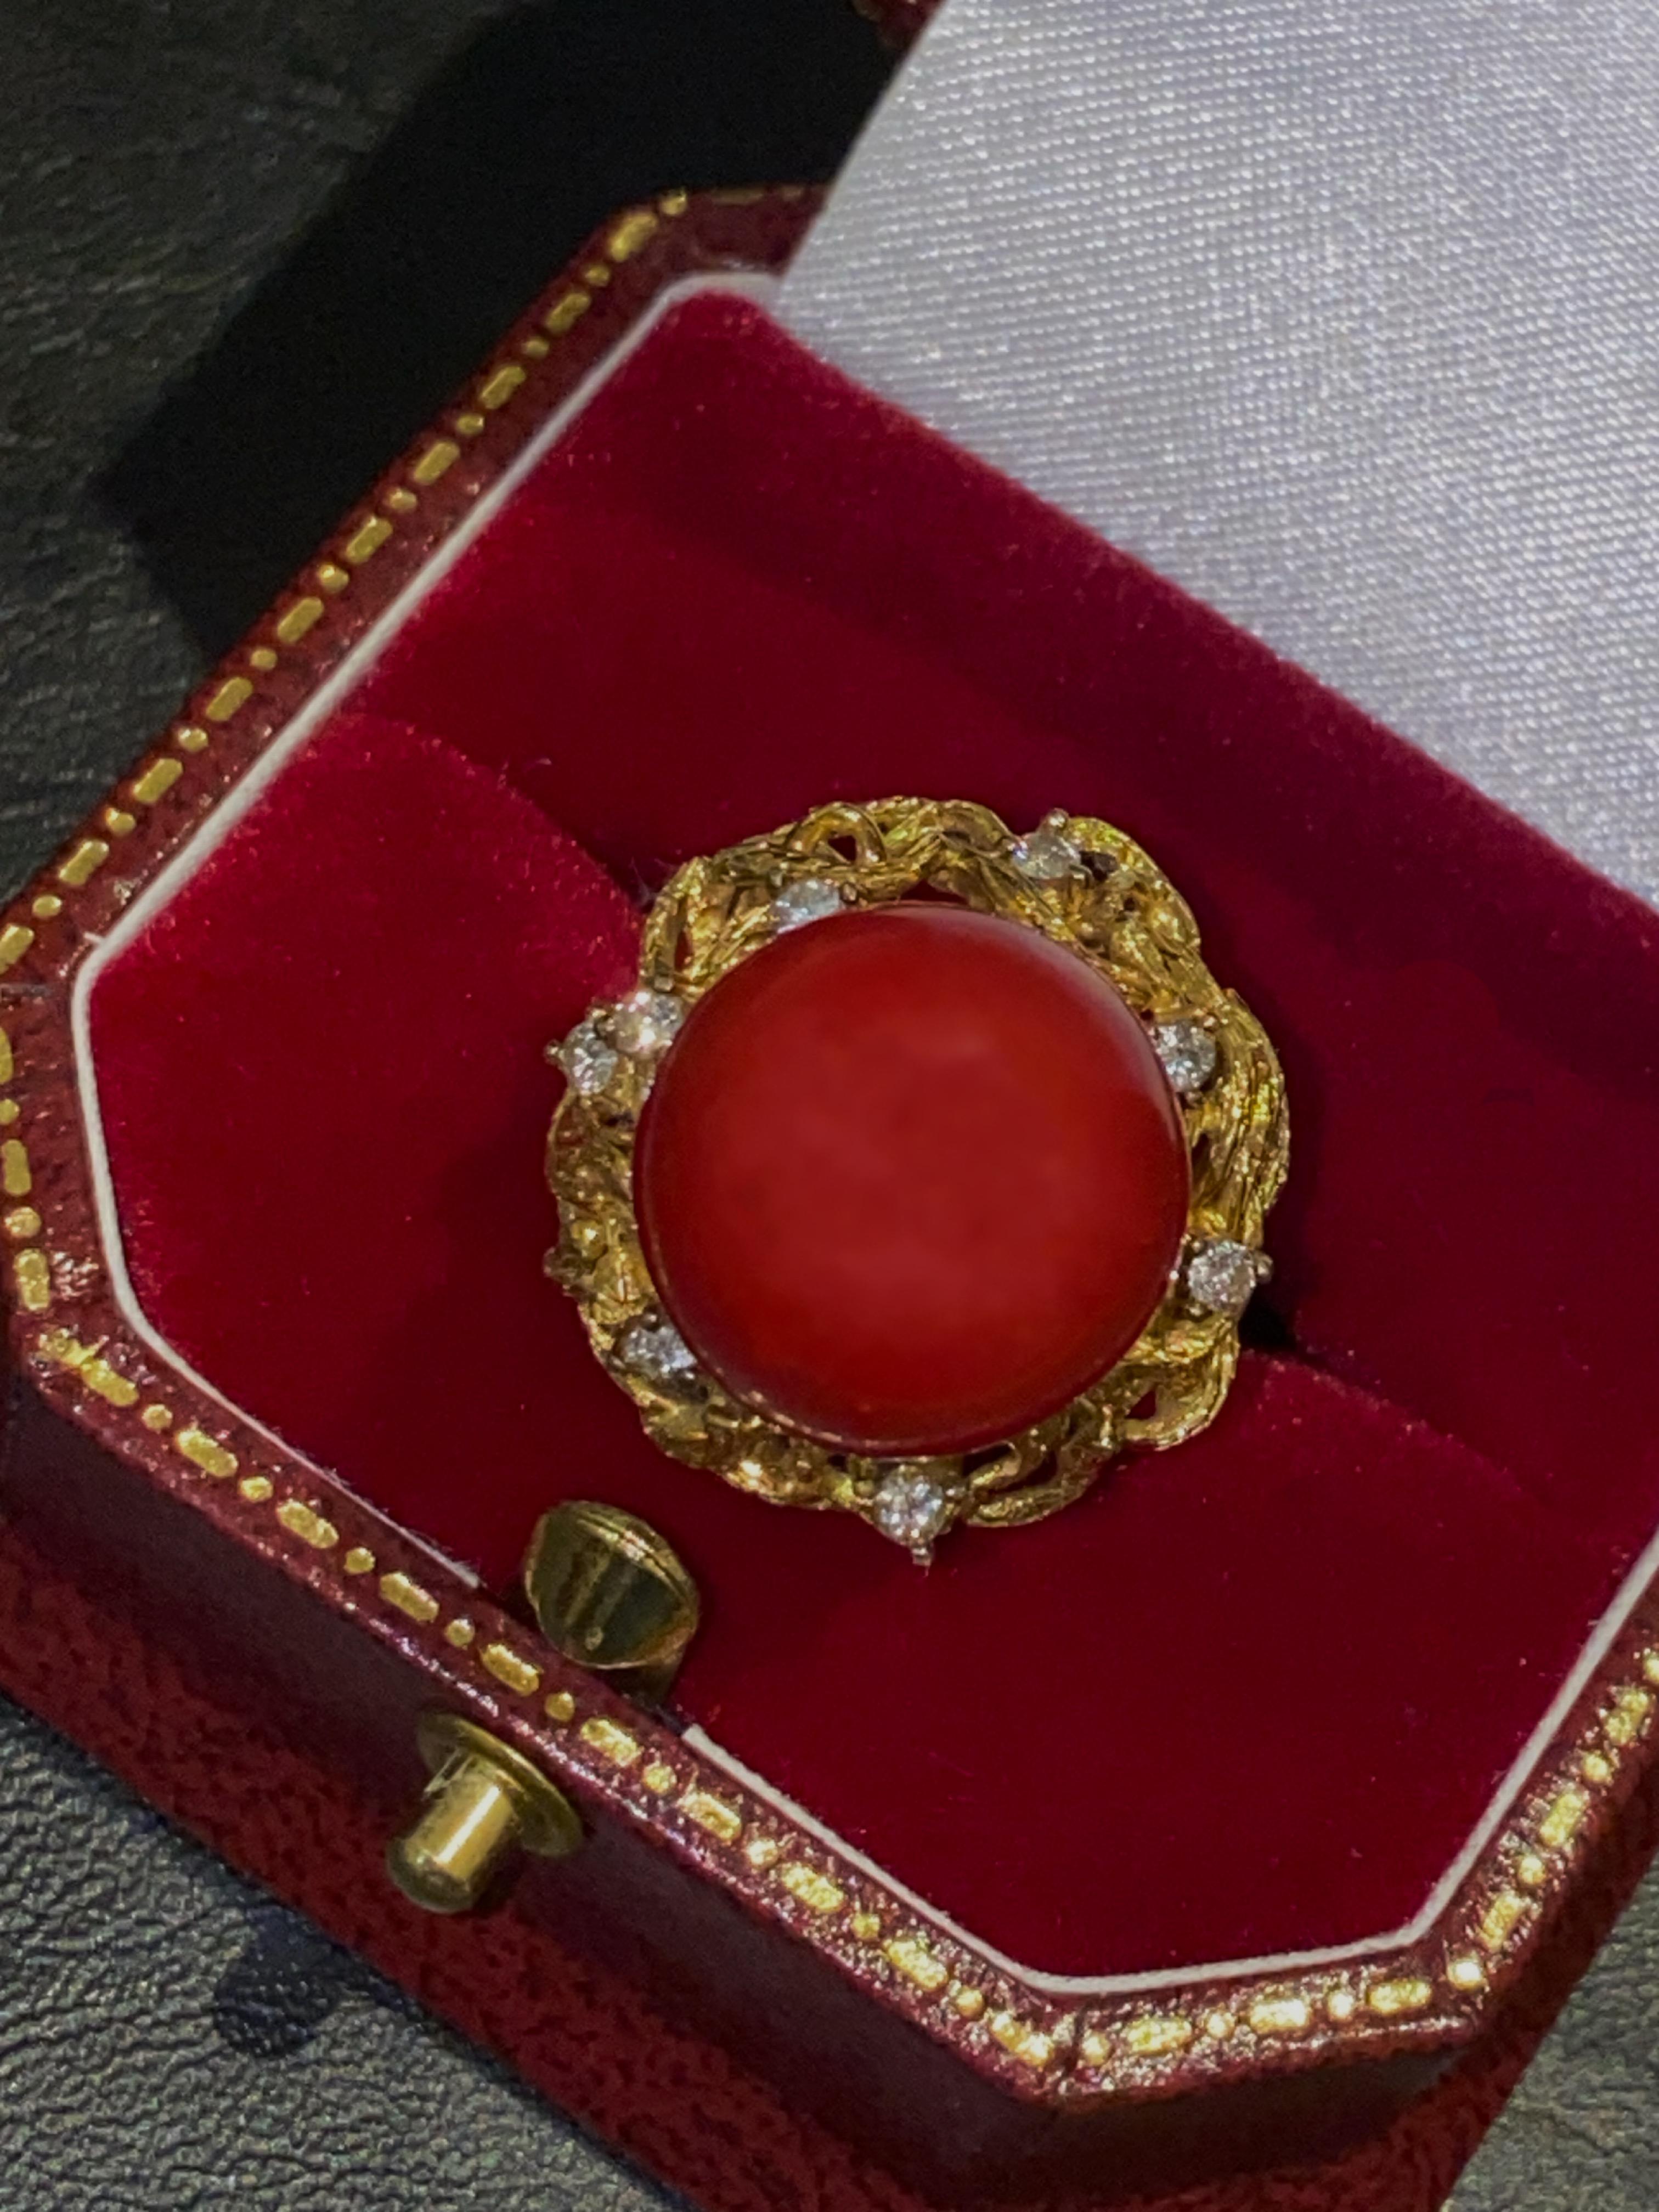 Cabochon 20ct (14mm) Natural Mediterranean OxBlood Red Coral & Diamond Ring in 14K Gold. For Sale